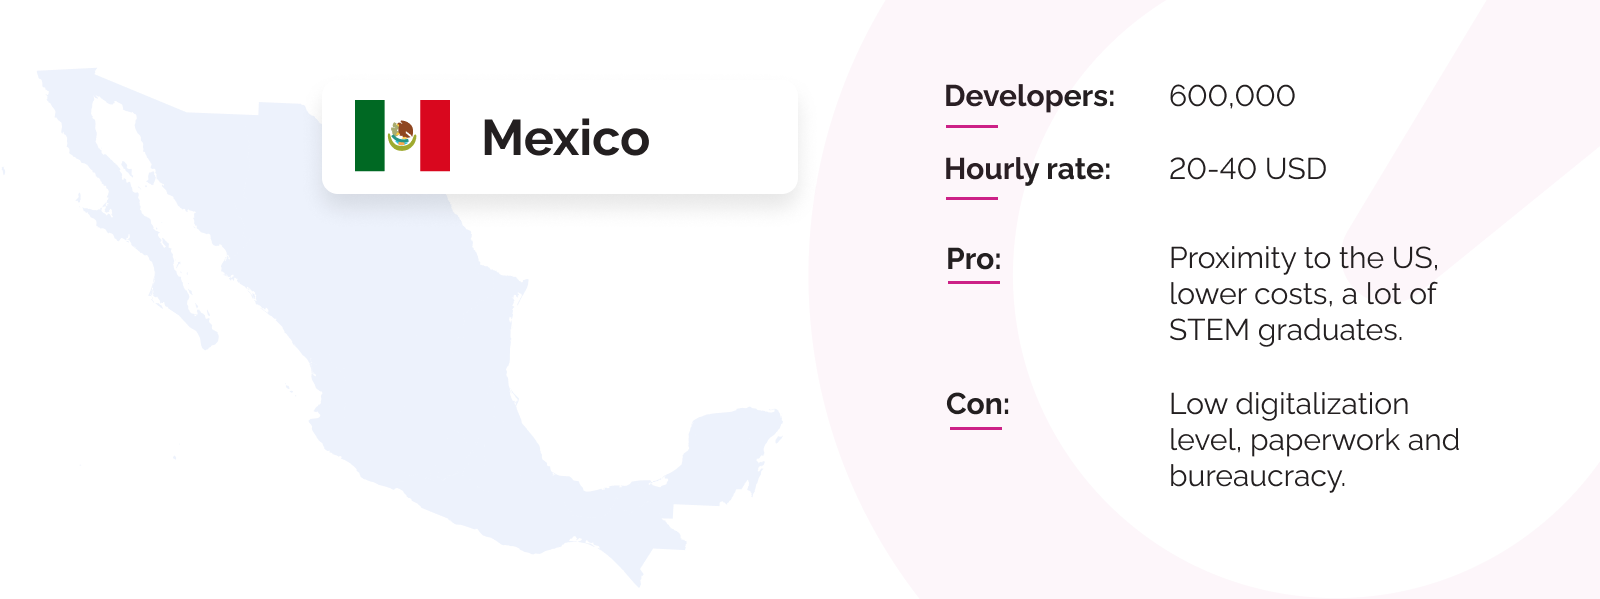 Software development outsourcing statistics for Mexico.